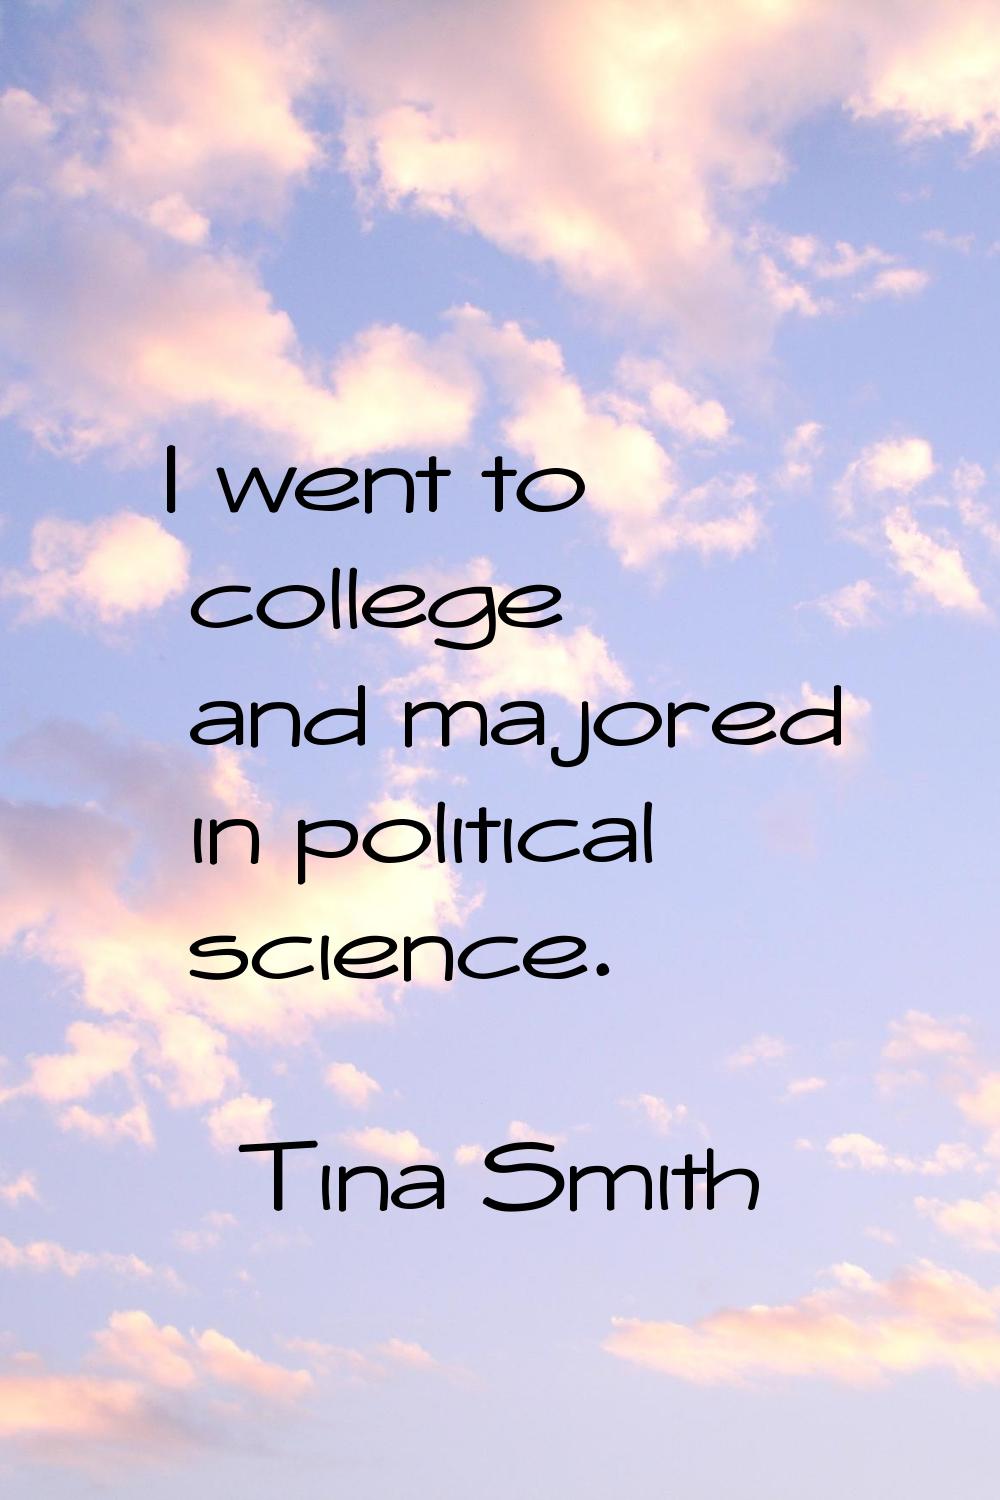 I went to college and majored in political science.